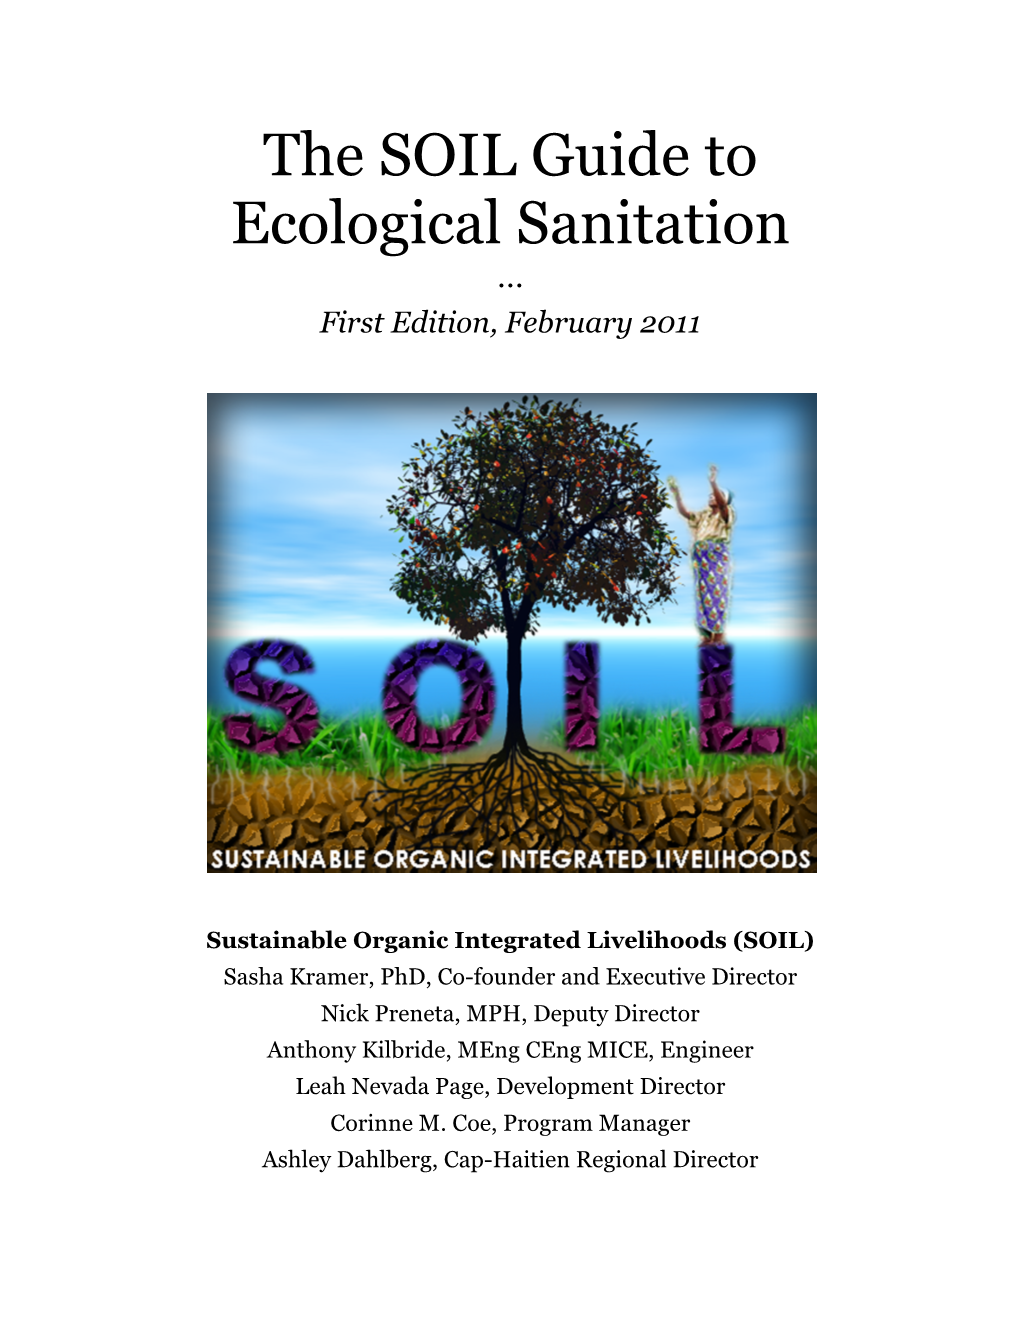 The SOIL Guide to Ecological Sanitation … First Edition, February 2011